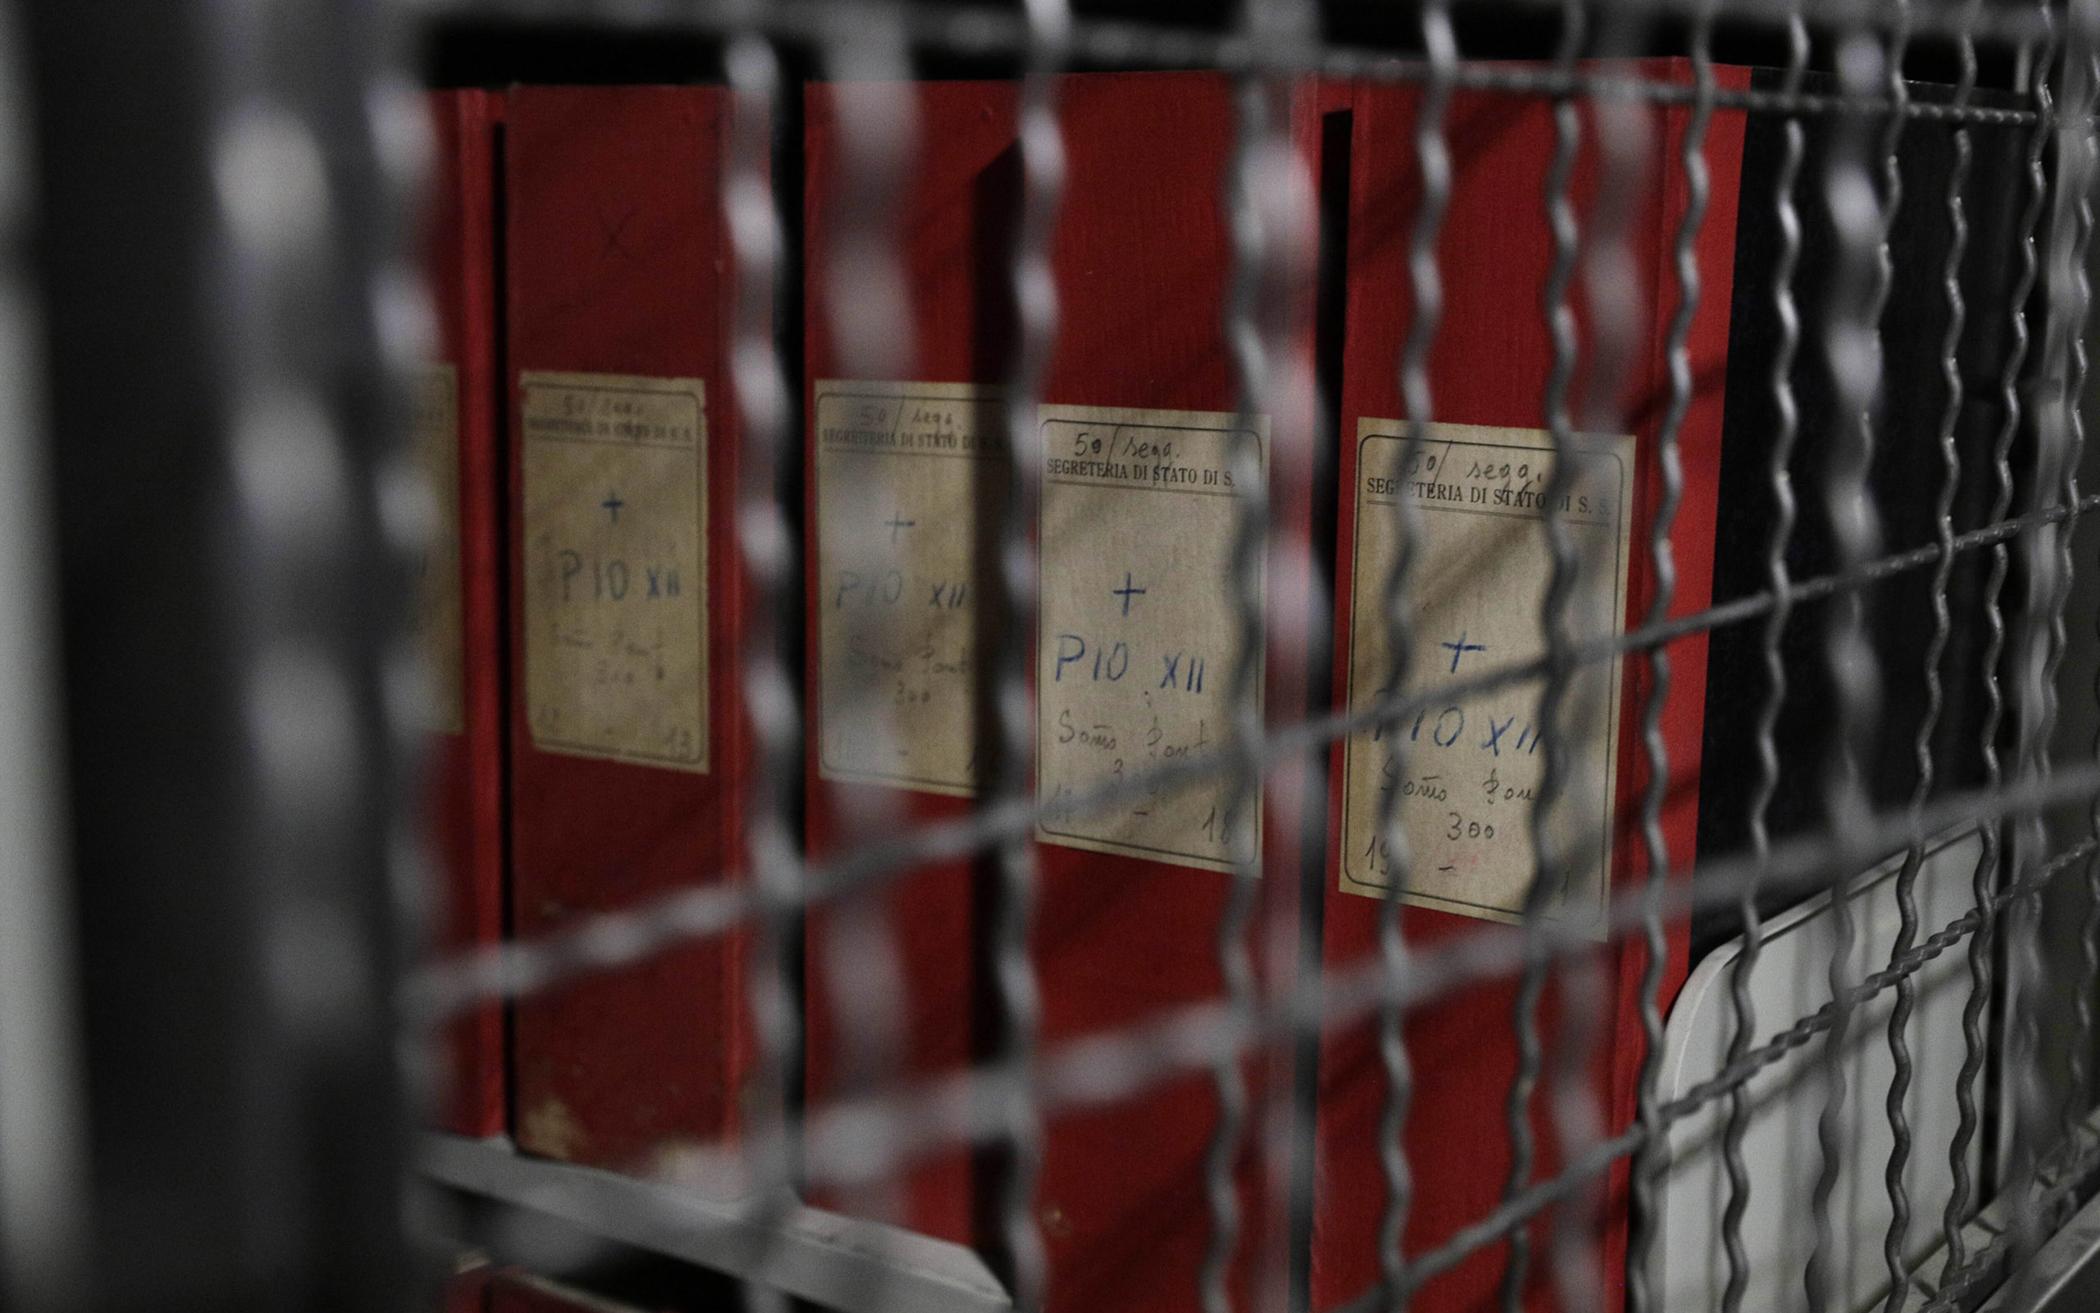 The Vatican’s apostolic library on Pope Pius XII opened to researchers on March 2, 2020. This photo of folders marked “Pius XII," seen through a grating, was taken during a guided tour for media of the Vatican library Feb. 27, 2020.